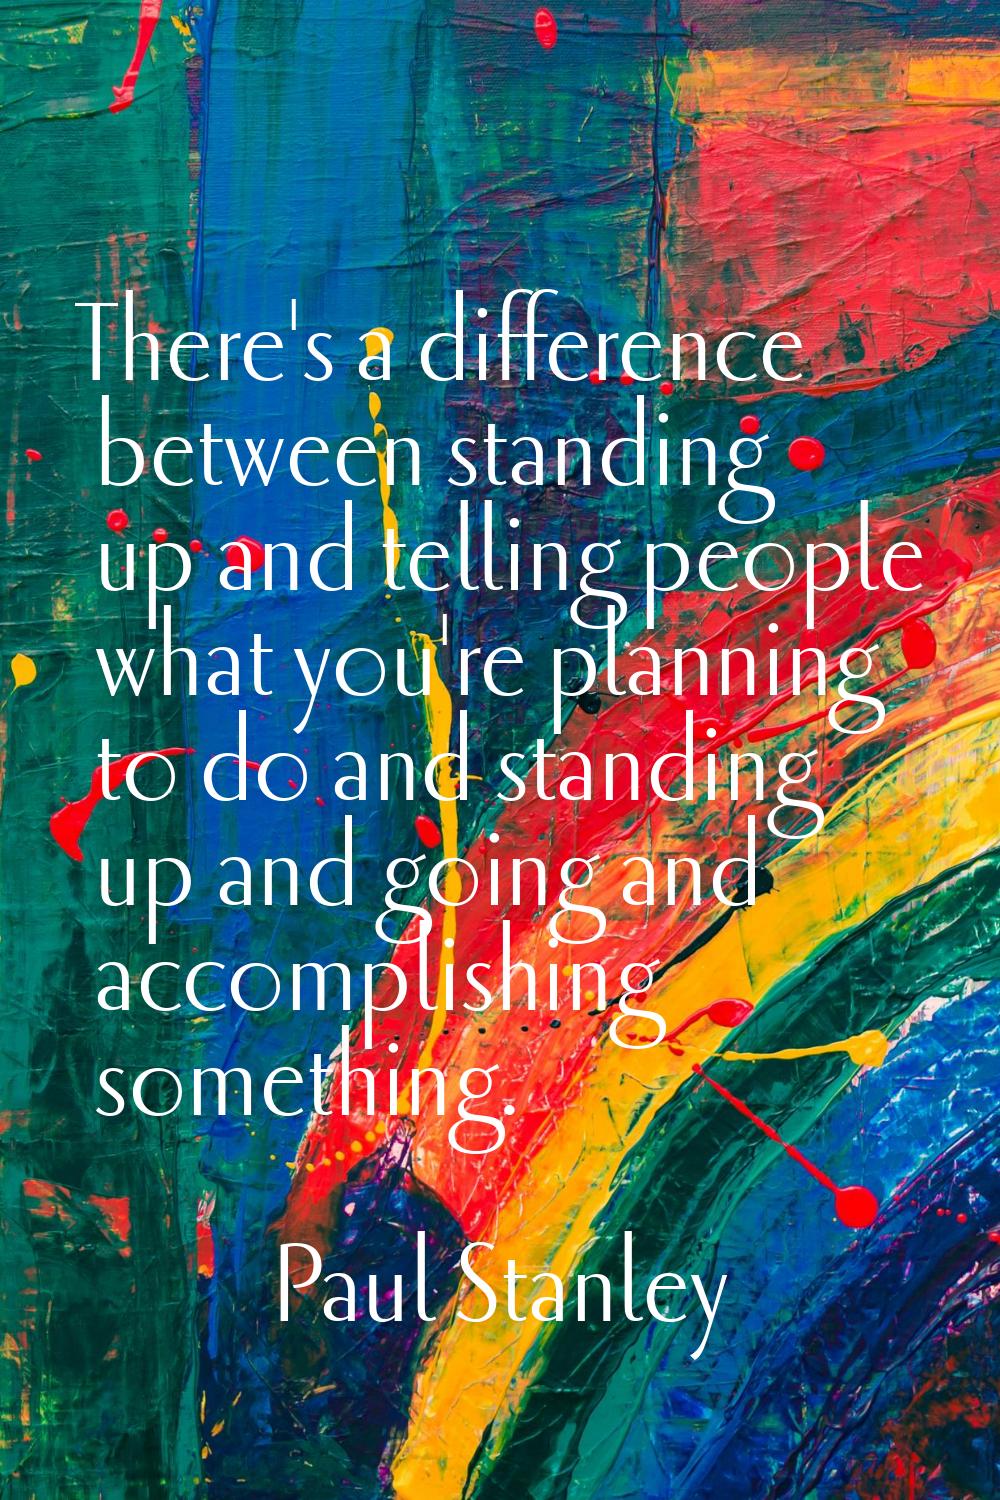 There's a difference between standing up and telling people what you're planning to do and standing